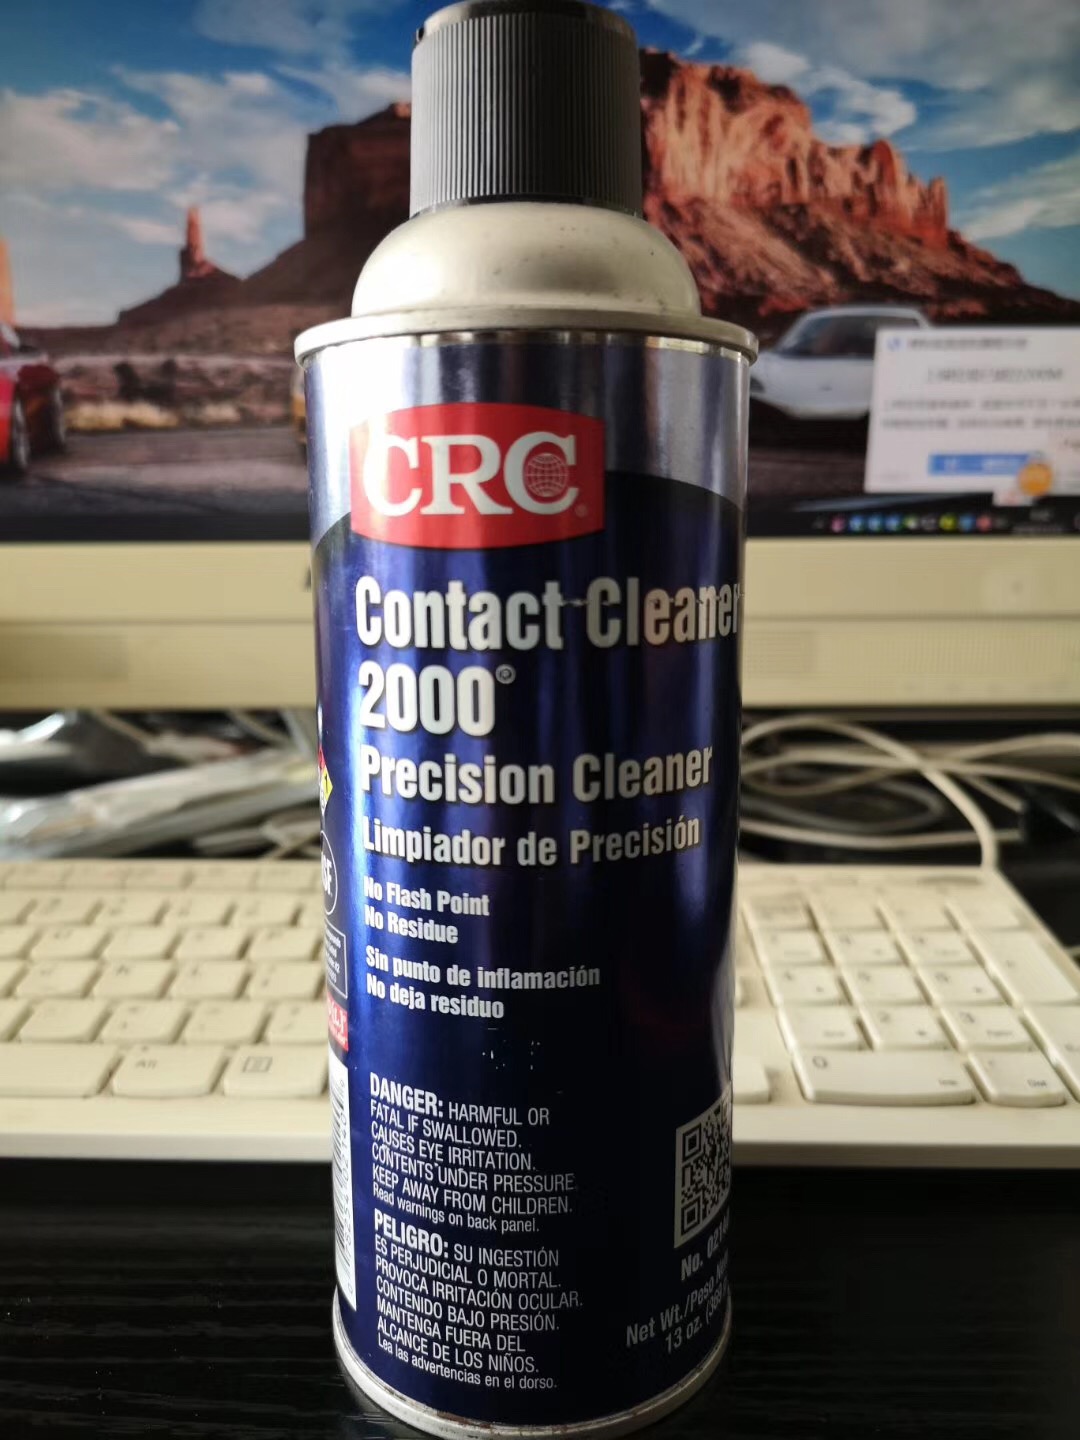 Contact cleaner 2000